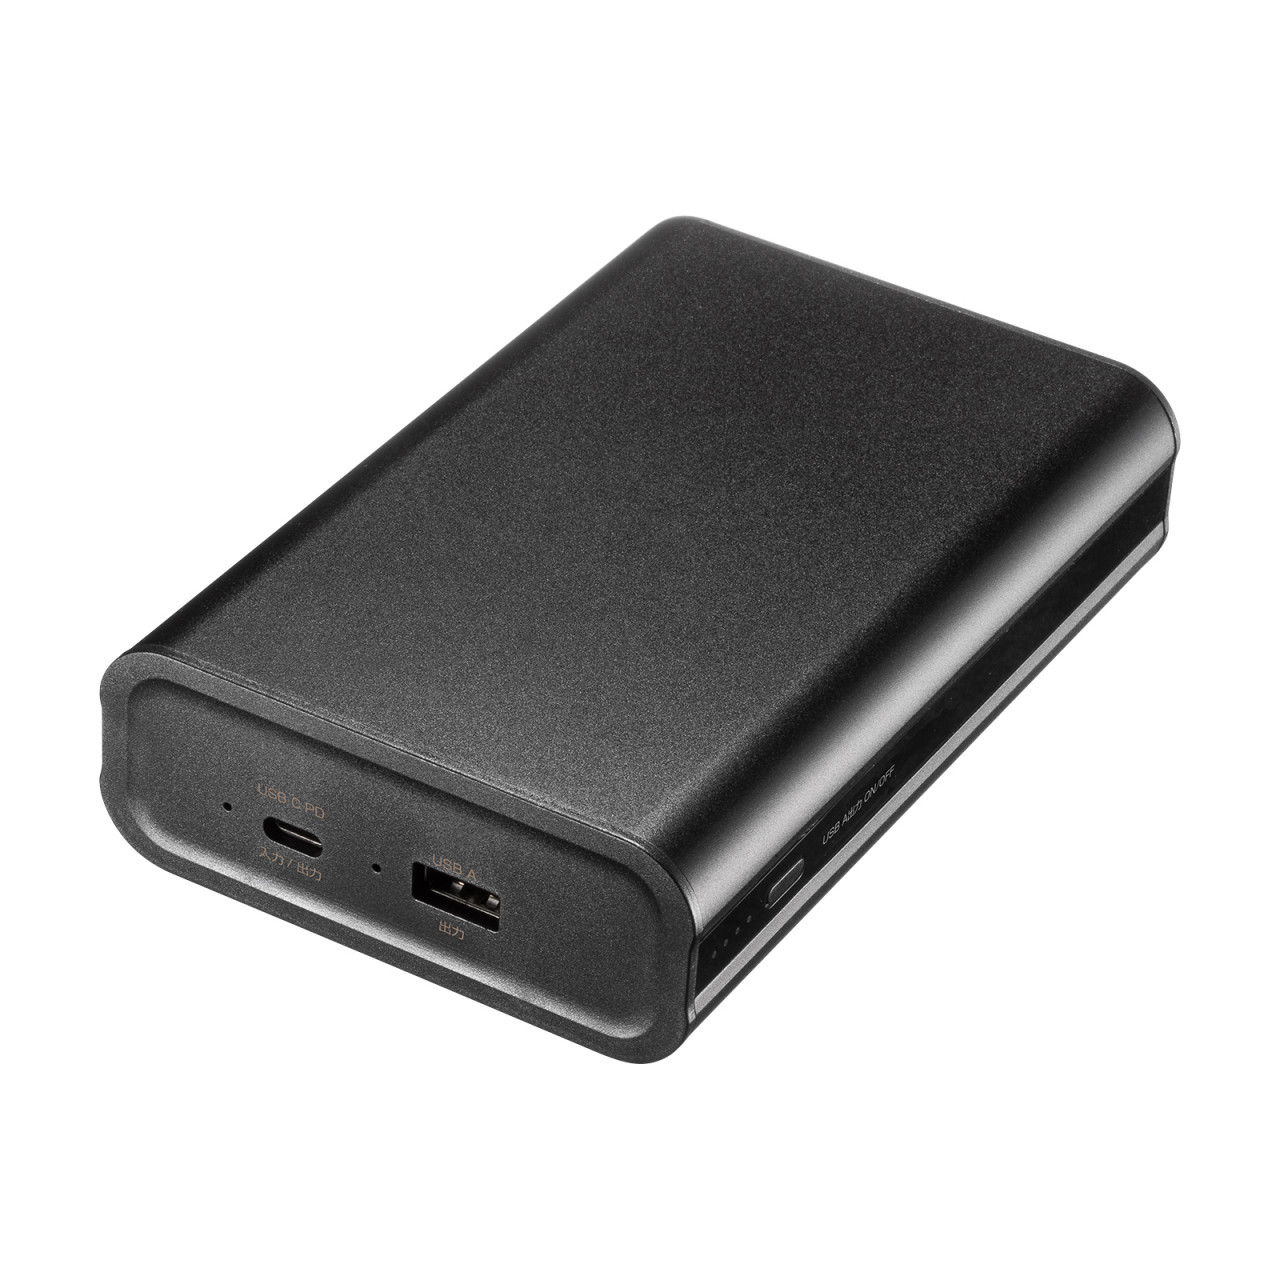 USB Power Delivery対応モバイルバッテリー（PD60W）